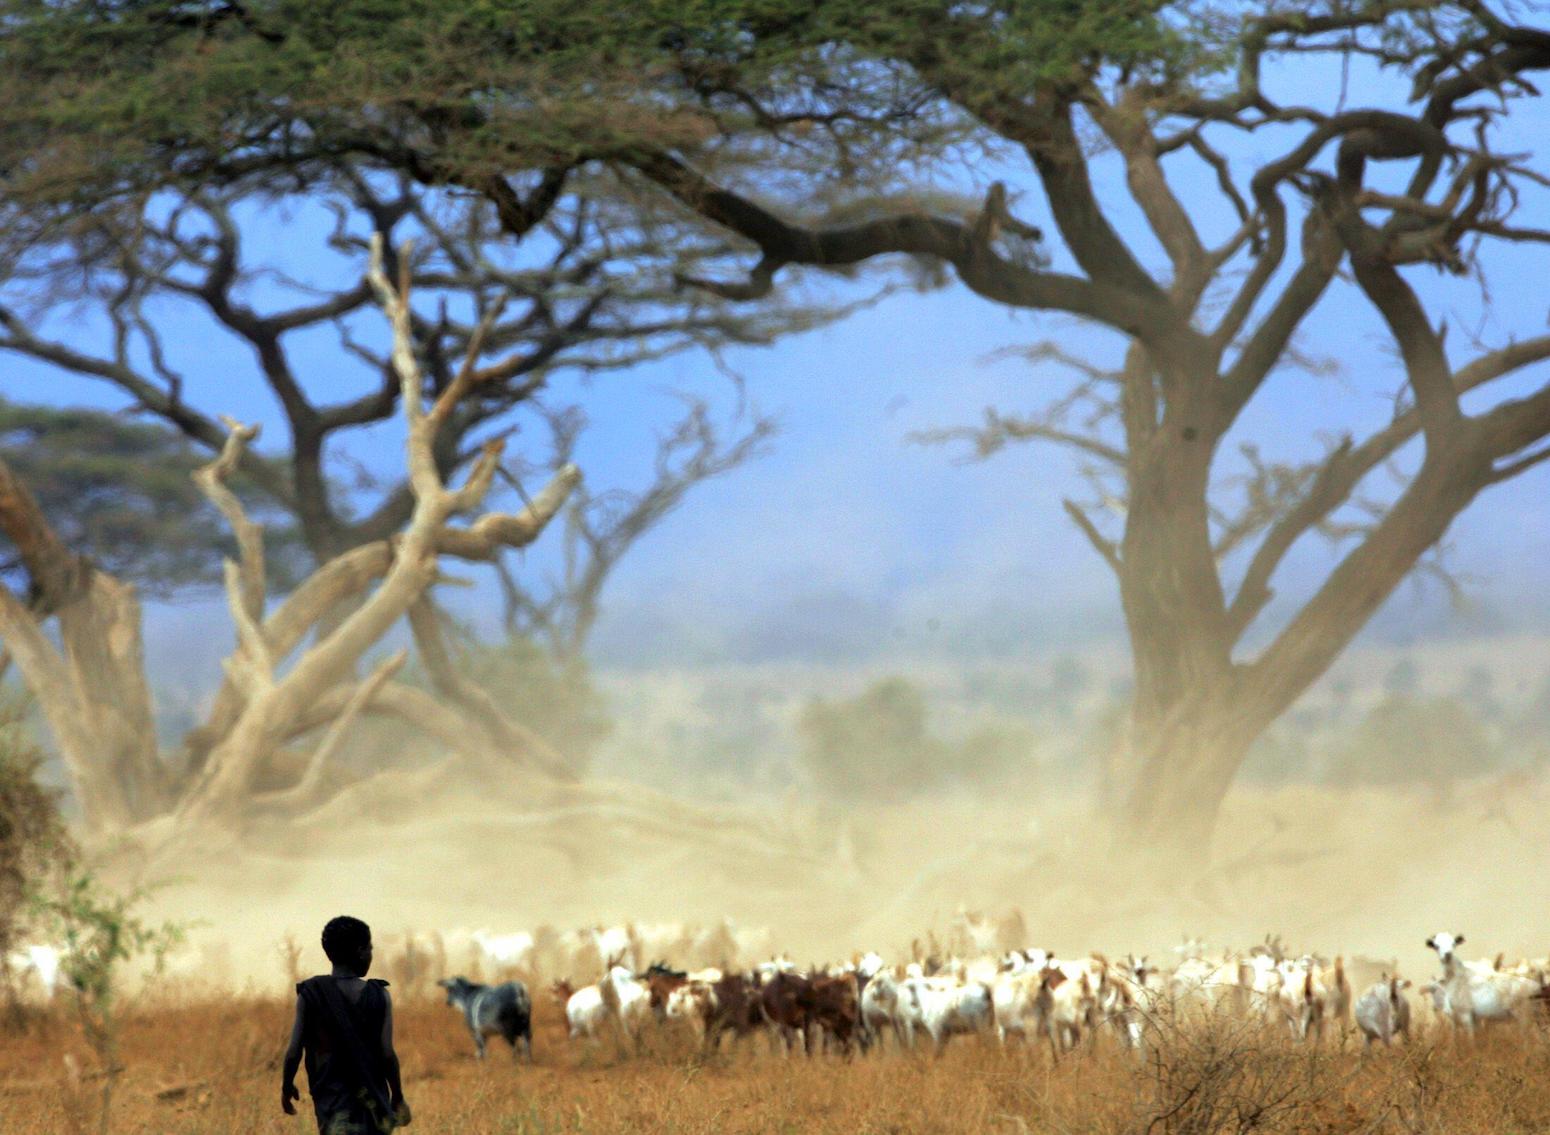 Masai boy running with a goat herd in Amboseli National Park in southeast Kenya